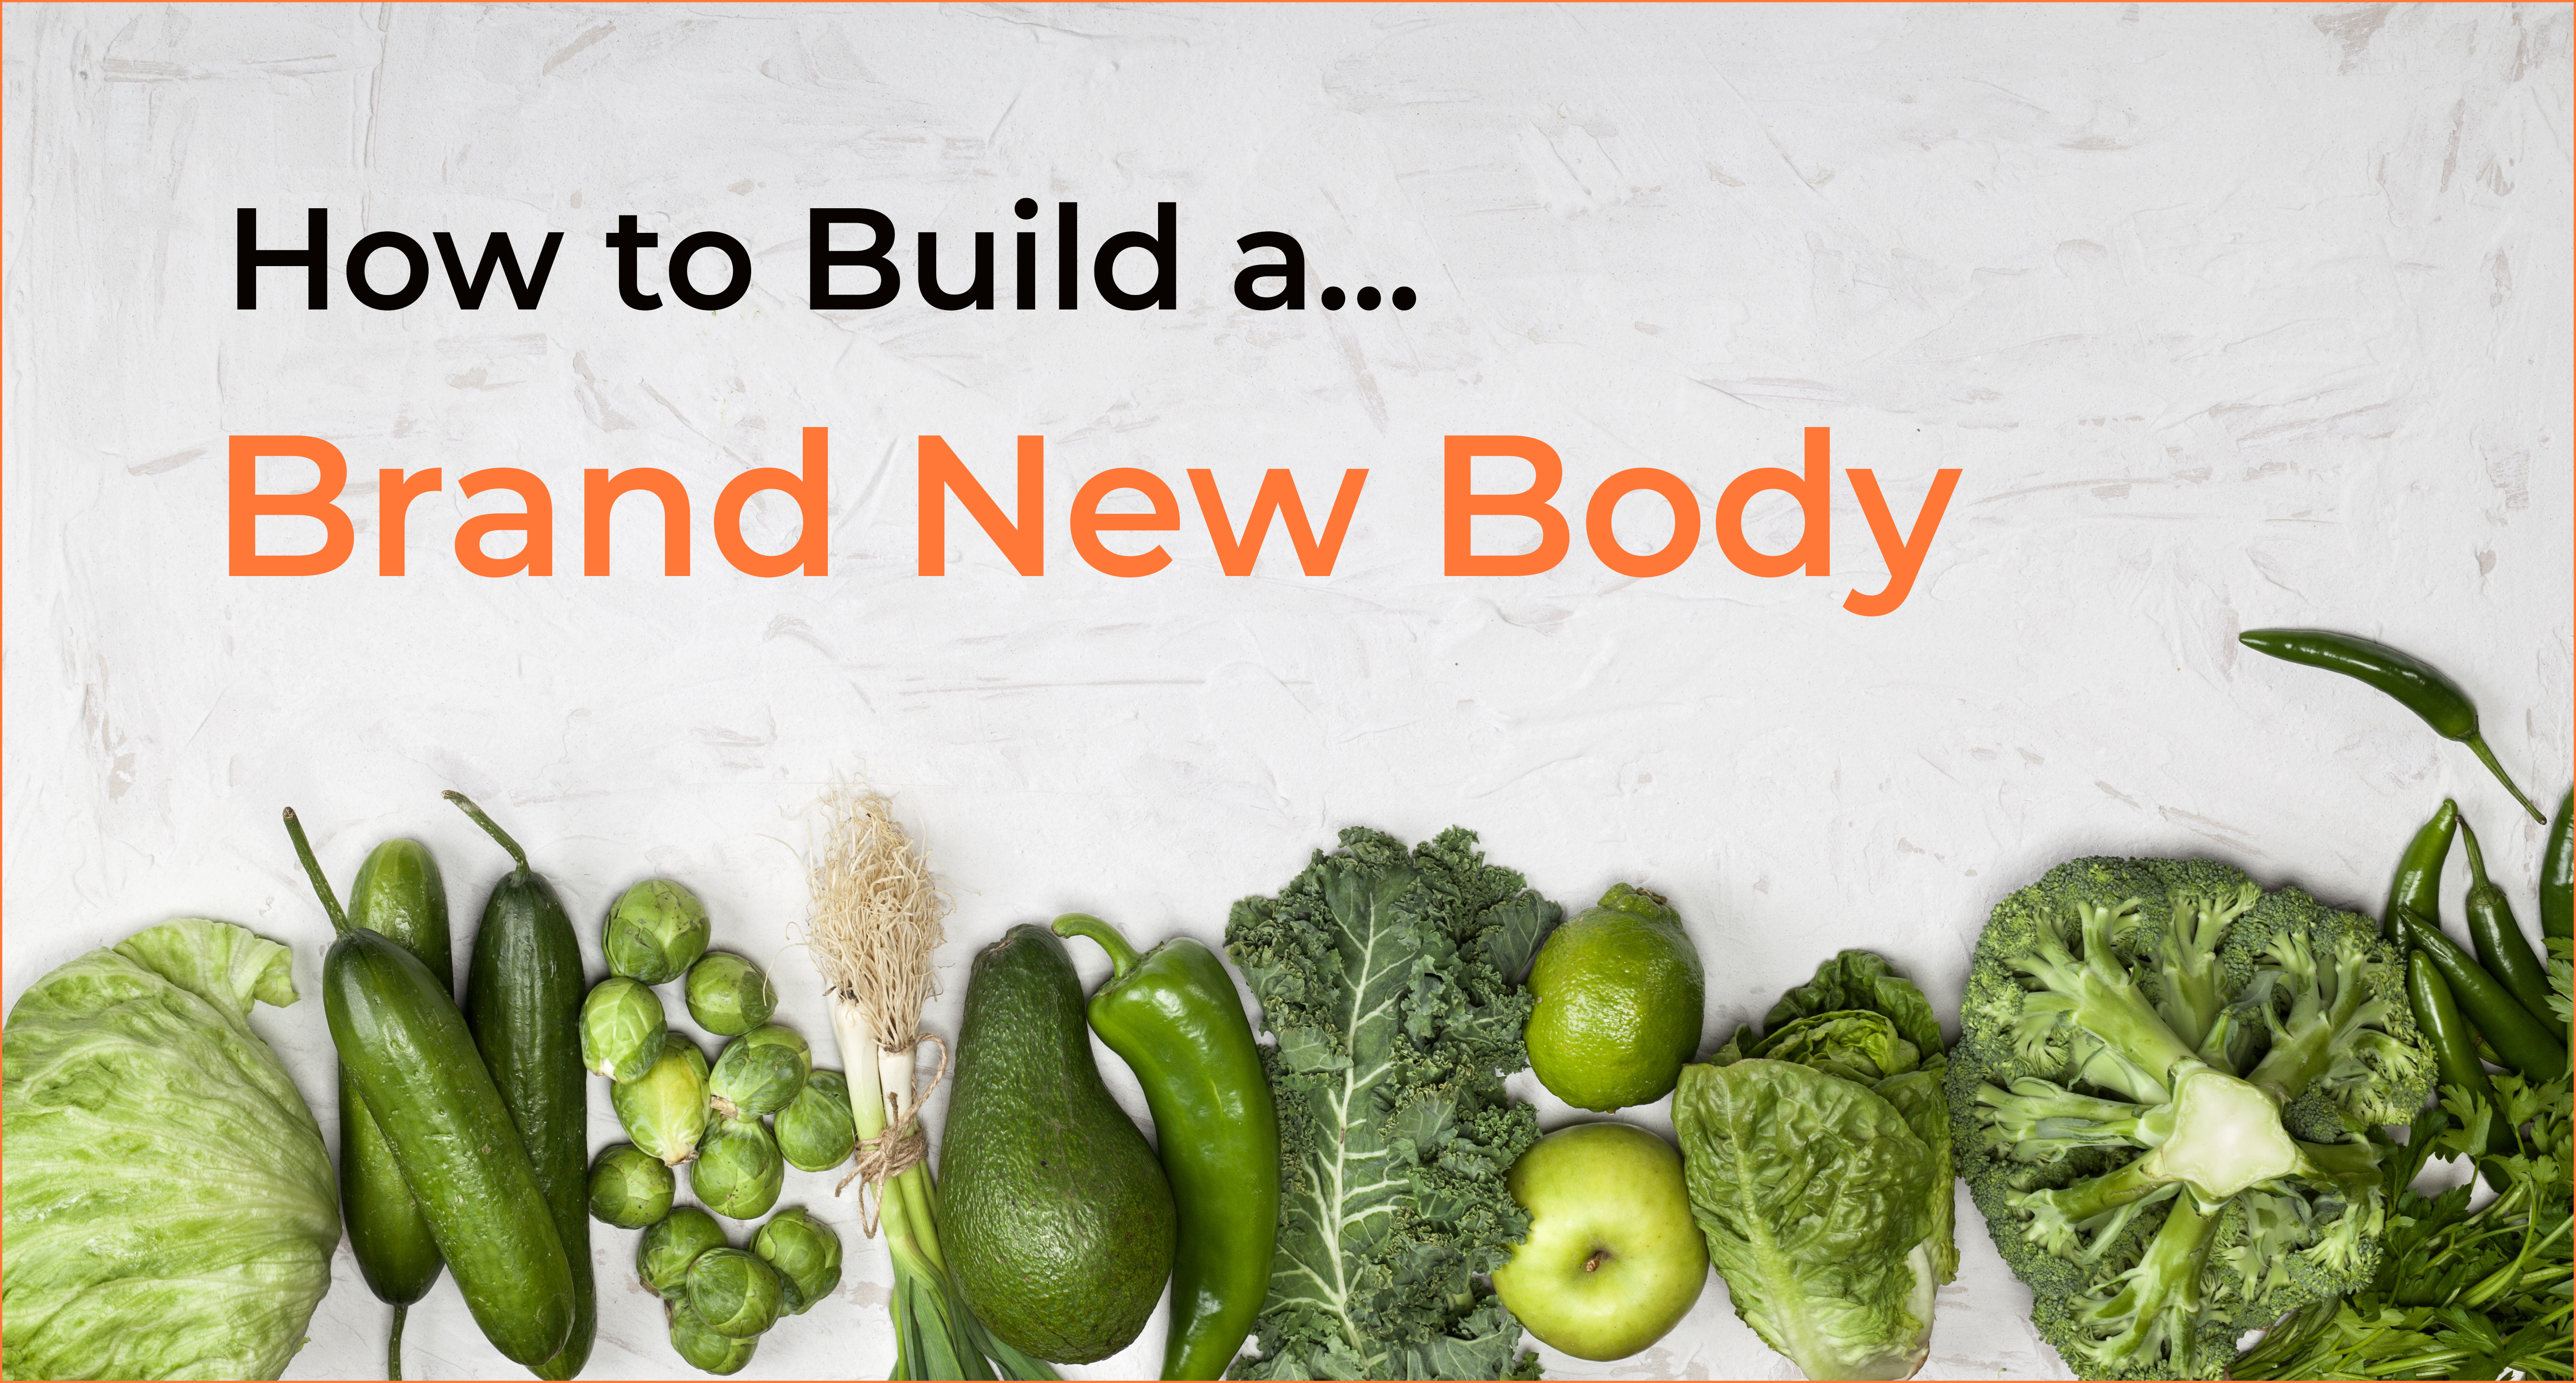 How To Build a Brand New Body